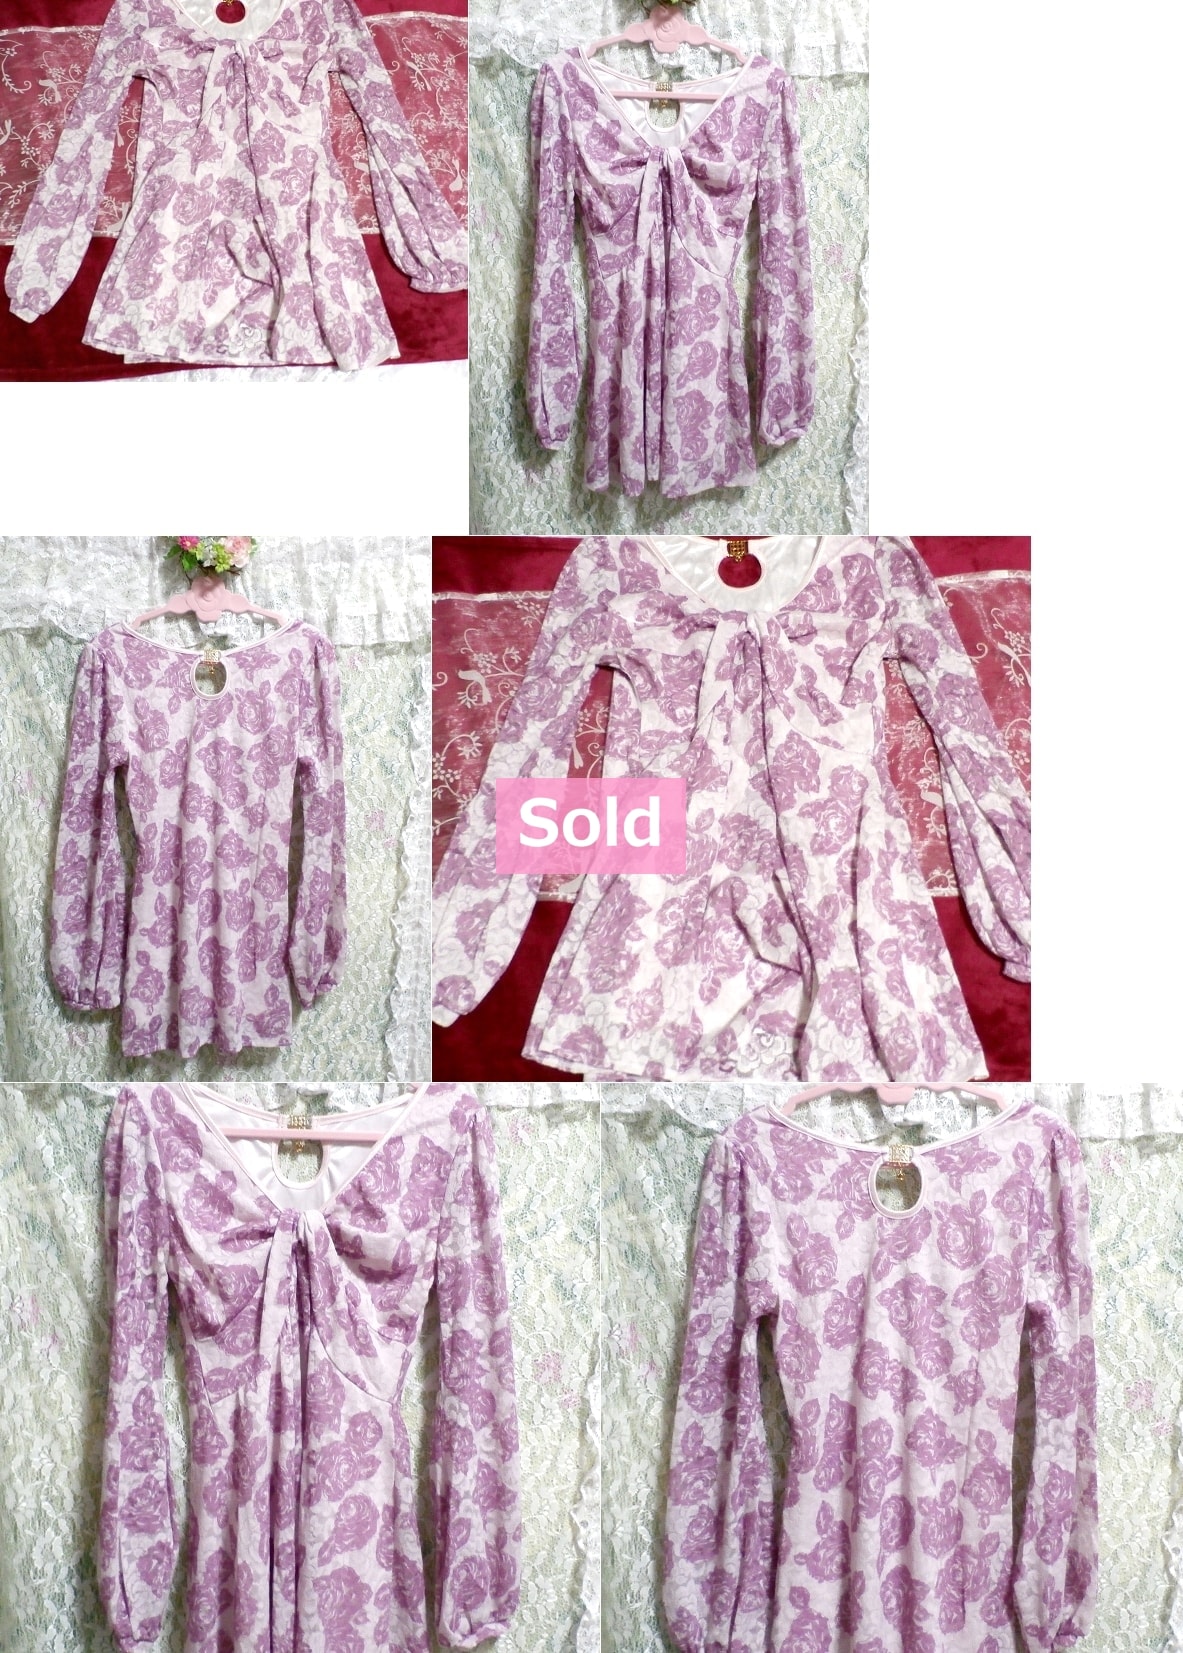 CECIL McBEE セシルマクビー 紫と白バラ花柄長袖チュニック/トップス Purple white rose floral pattern long sleeve tunic/tops